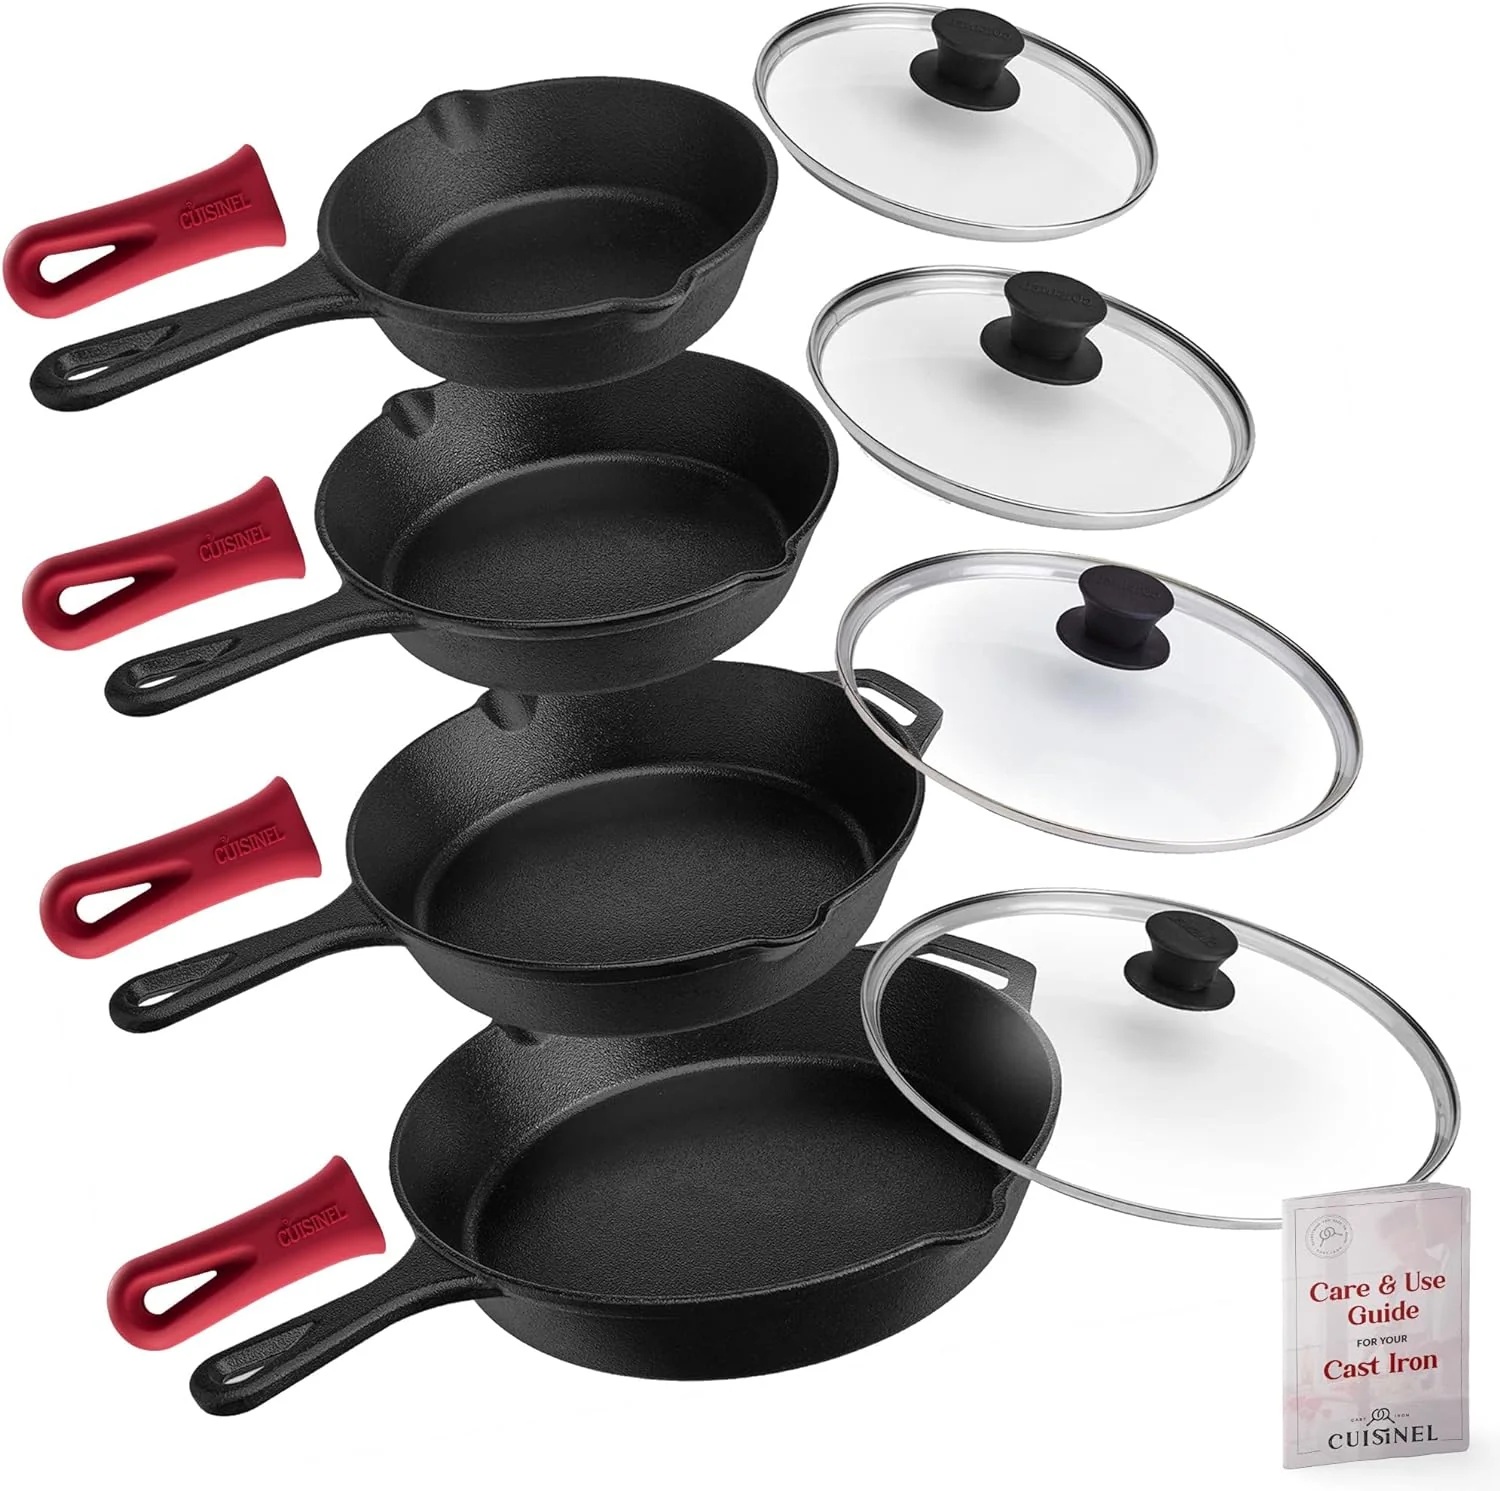 Cast Iron Skillets Set Glass Lids Silicone Handle Grips Pre Seasoned Frying Pan Oven Cookware